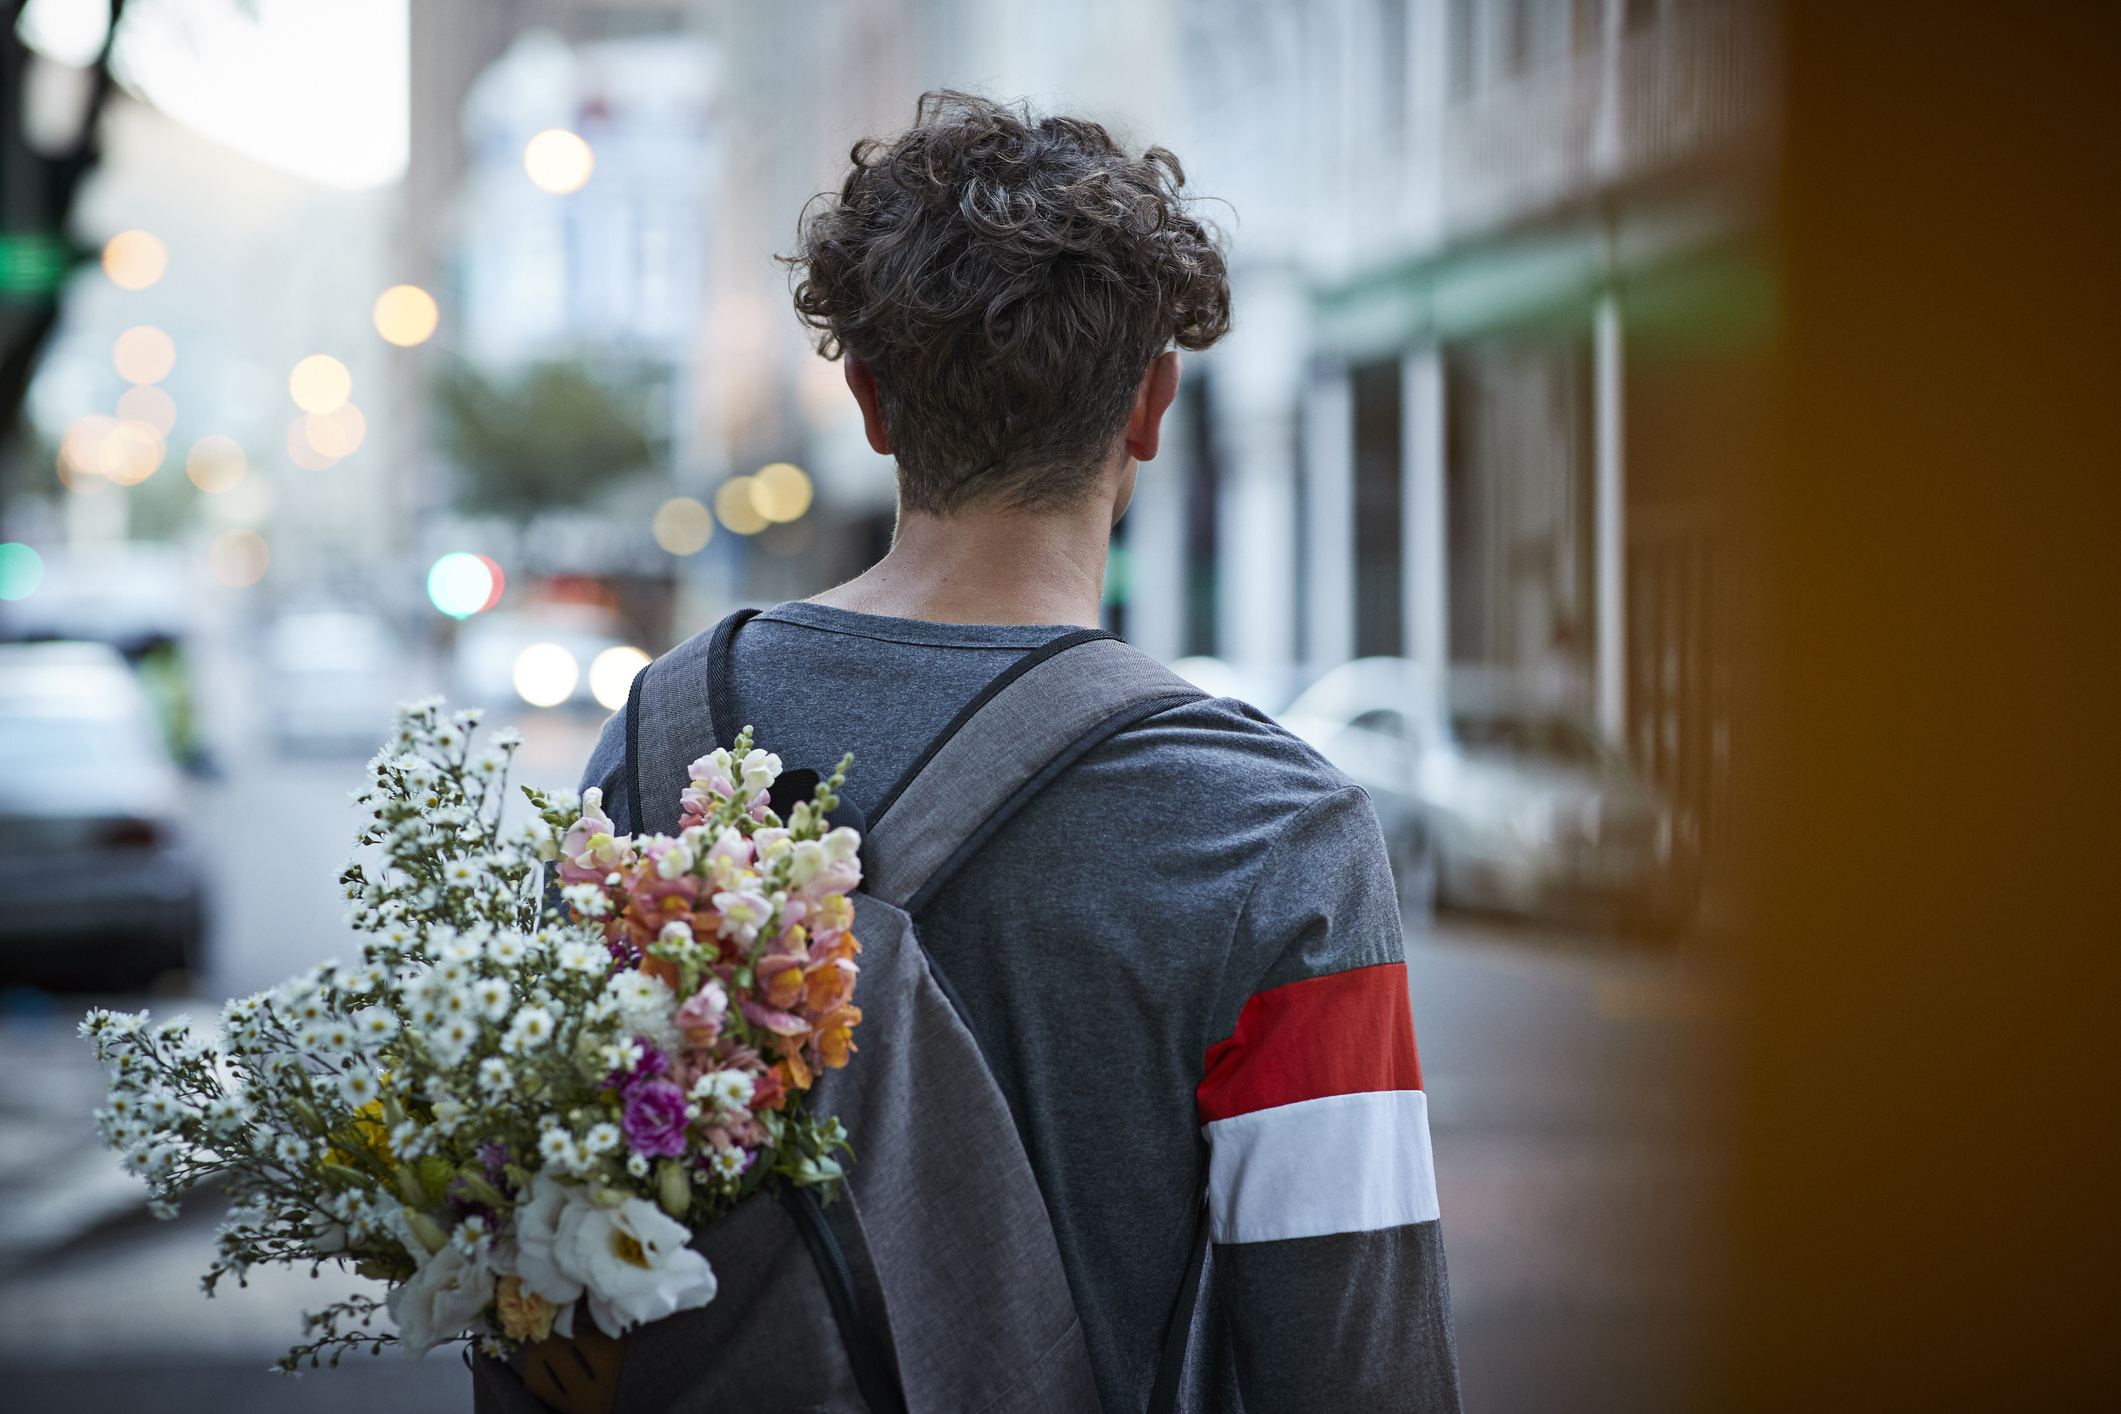 A guy is carrying a bouquet of flowers in his backpack